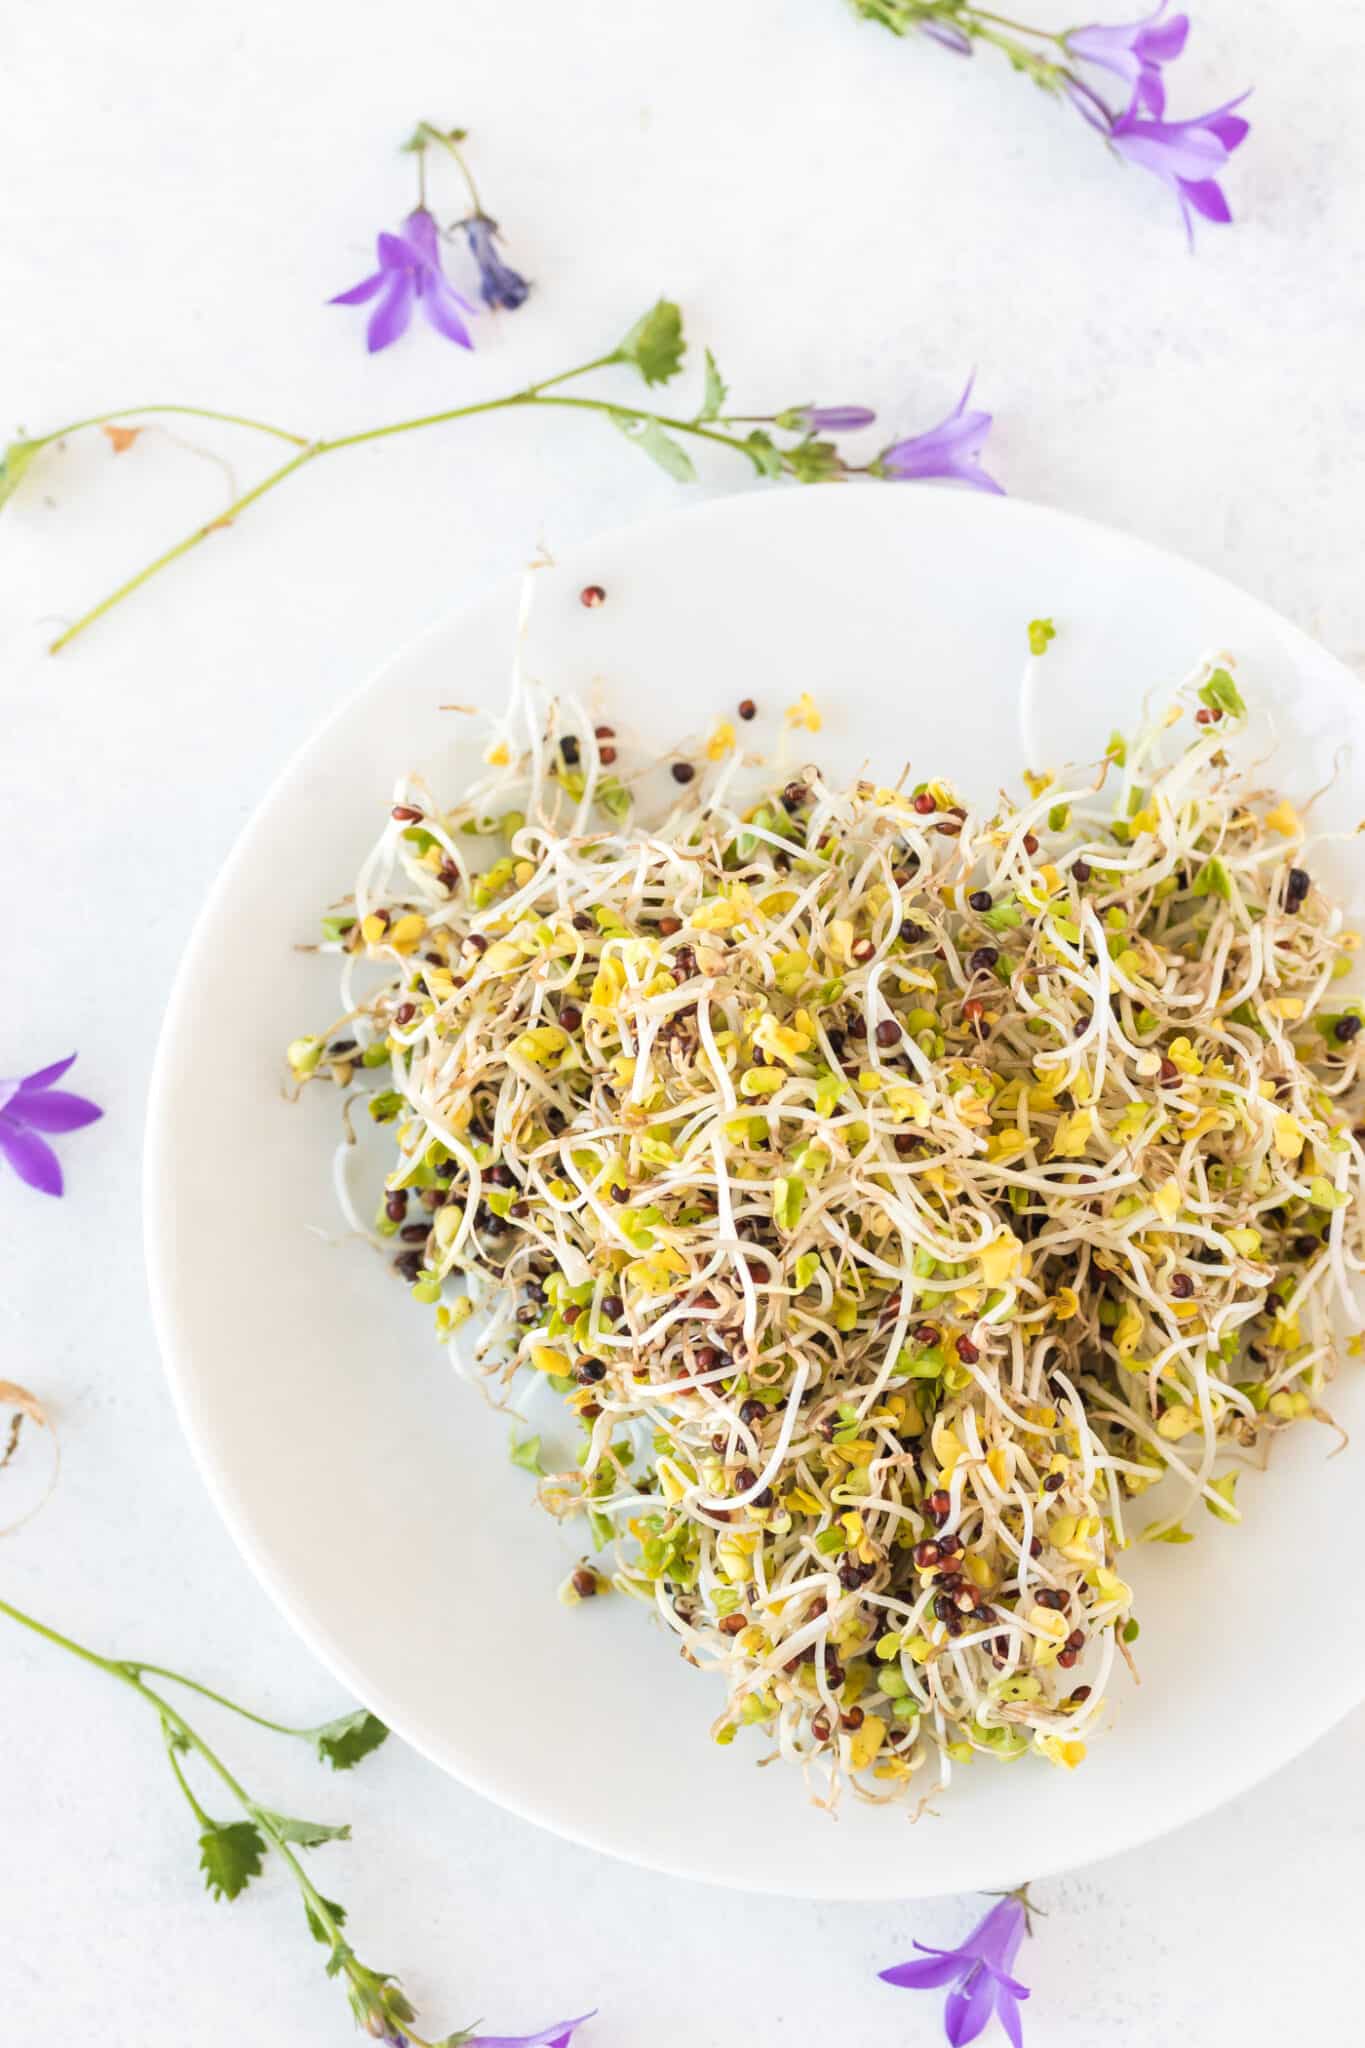 fresh broccoli sprouts in a bowl on table with purple flowers.